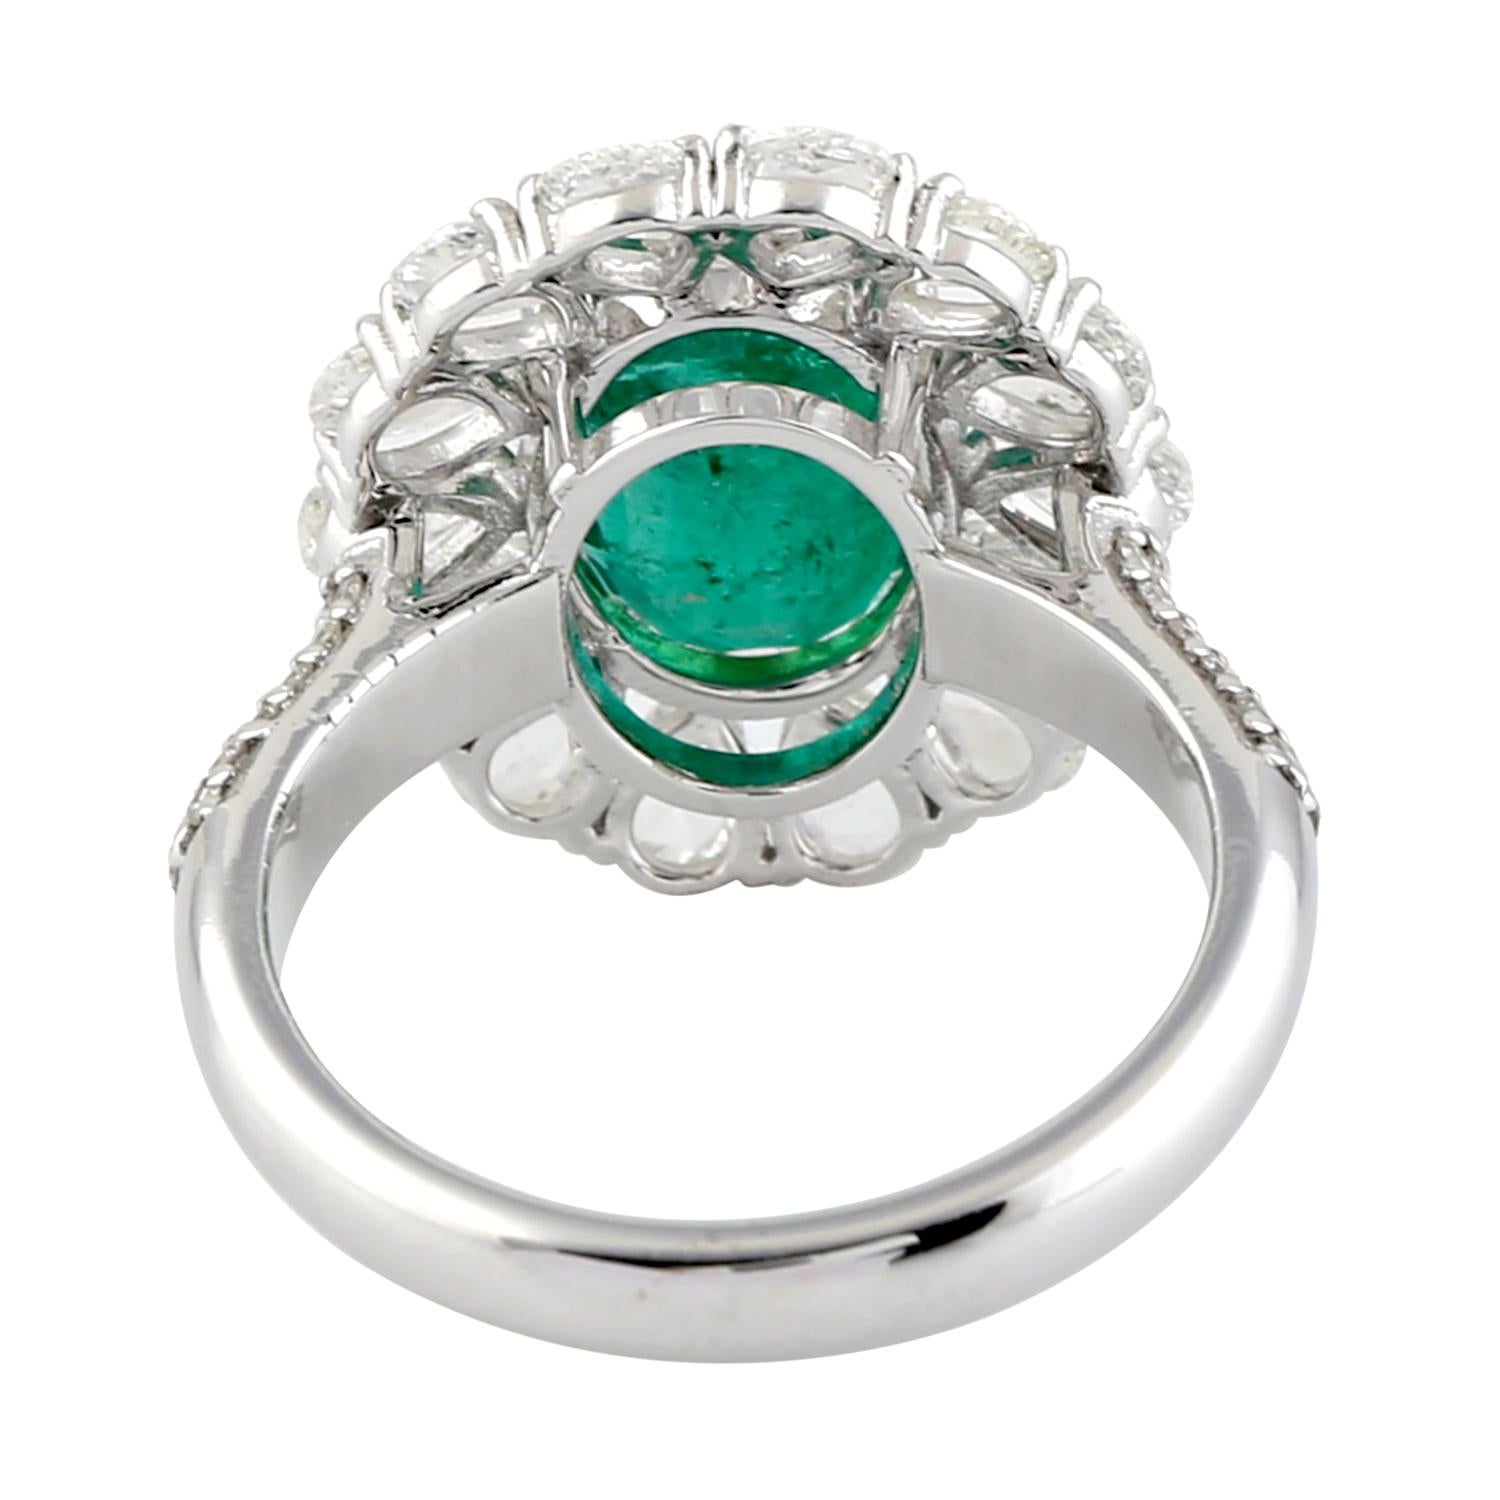 Designer Oval shape Zambian Emerald ring with pear shape diamonds in 18K Gold is truly a special occasion ring.


Ring Size 7
18kt White Gold 6.026gms
Diamond 1.61cts
Natural Zambian Emeralds 3.160cts